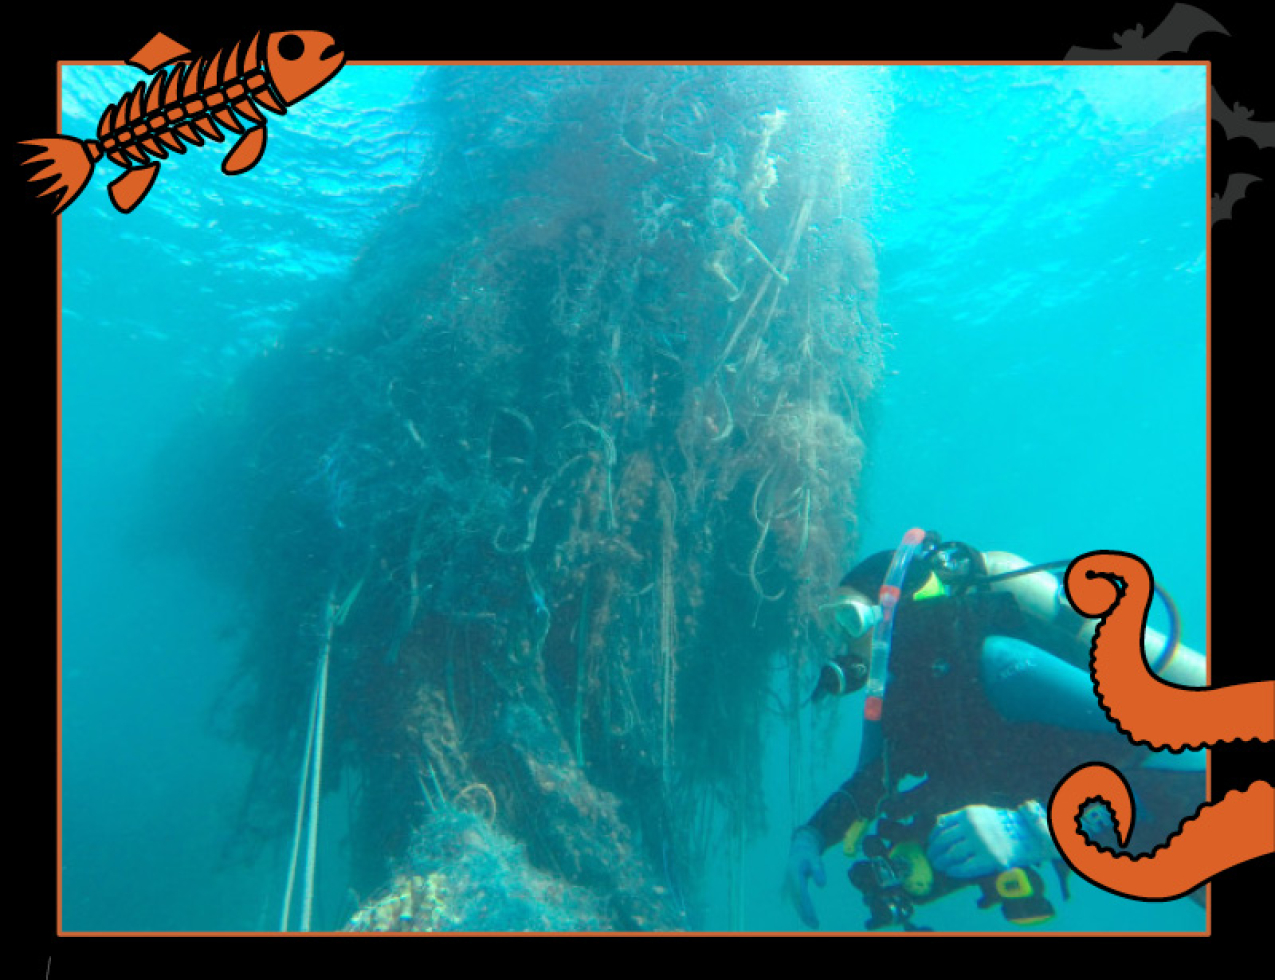 A net floating and tangled up in the ocean weighs close to 1.5 tons. Border of the photo is black with orange sea creature graphics of octopus tentacles and a fish skeleton. Text: The spooky truth about ghost fishing, #NOAASpookyScience with NOAA logo.